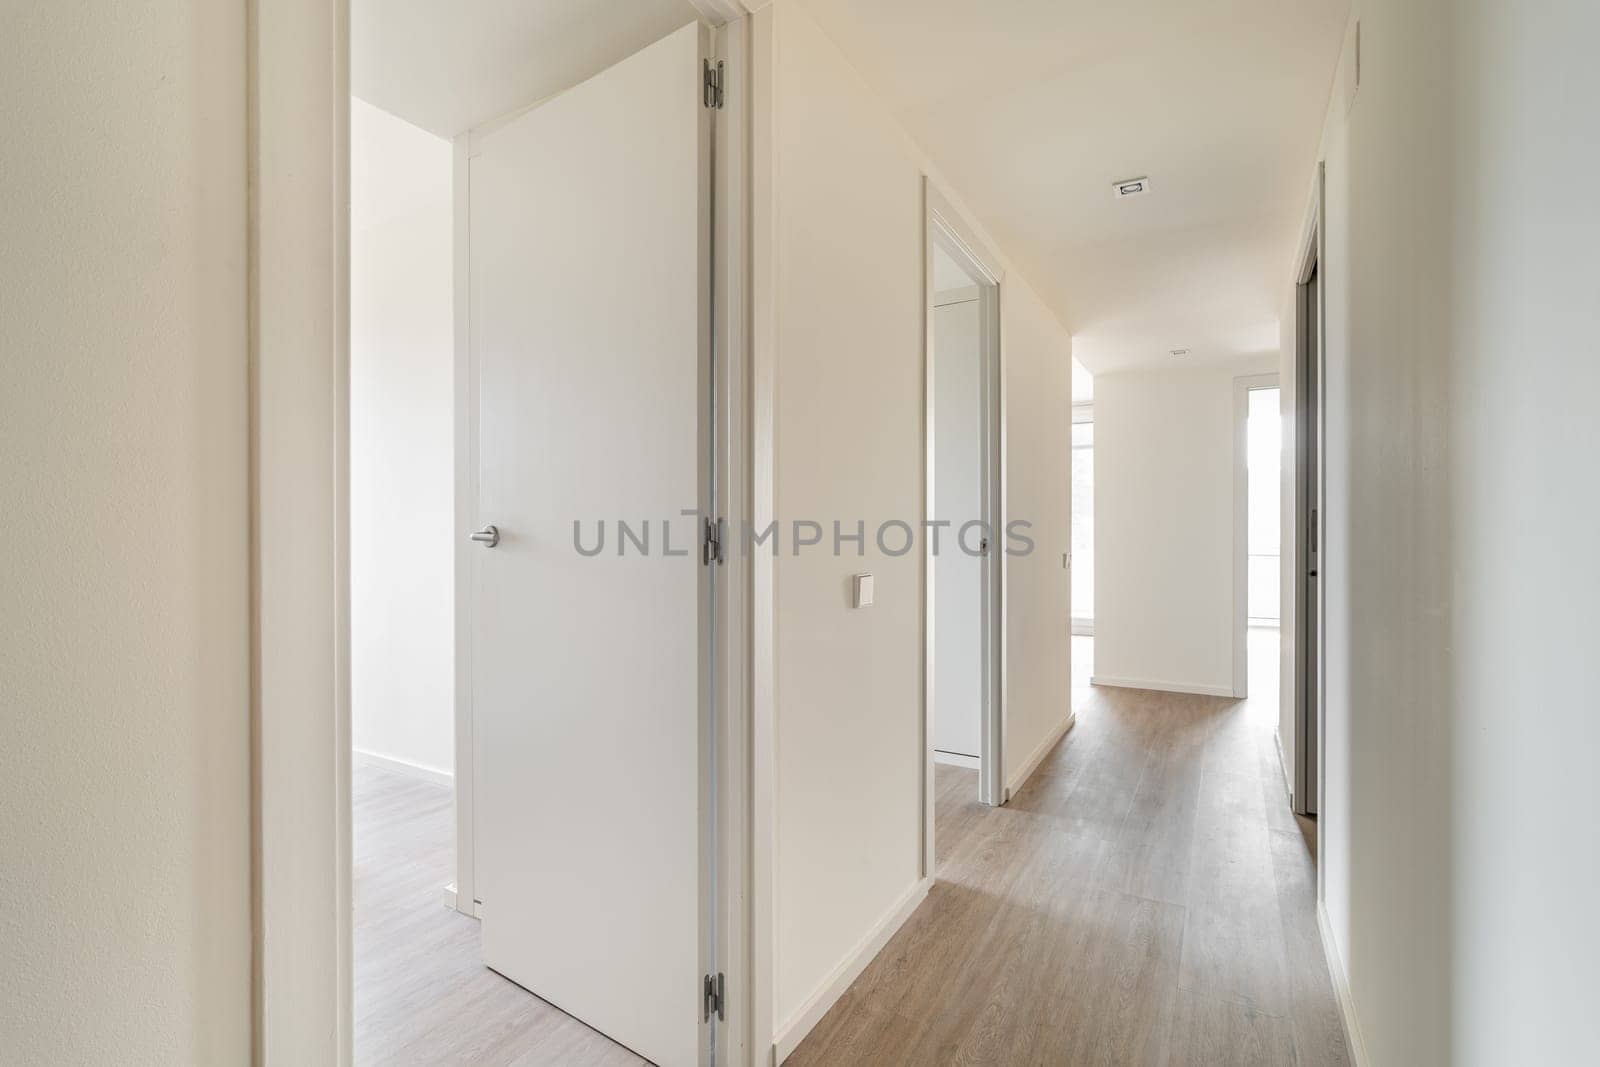 Stylish empty long corridor with open doors to different rooms. Bright multi-room designer apartment after renovation without furniture